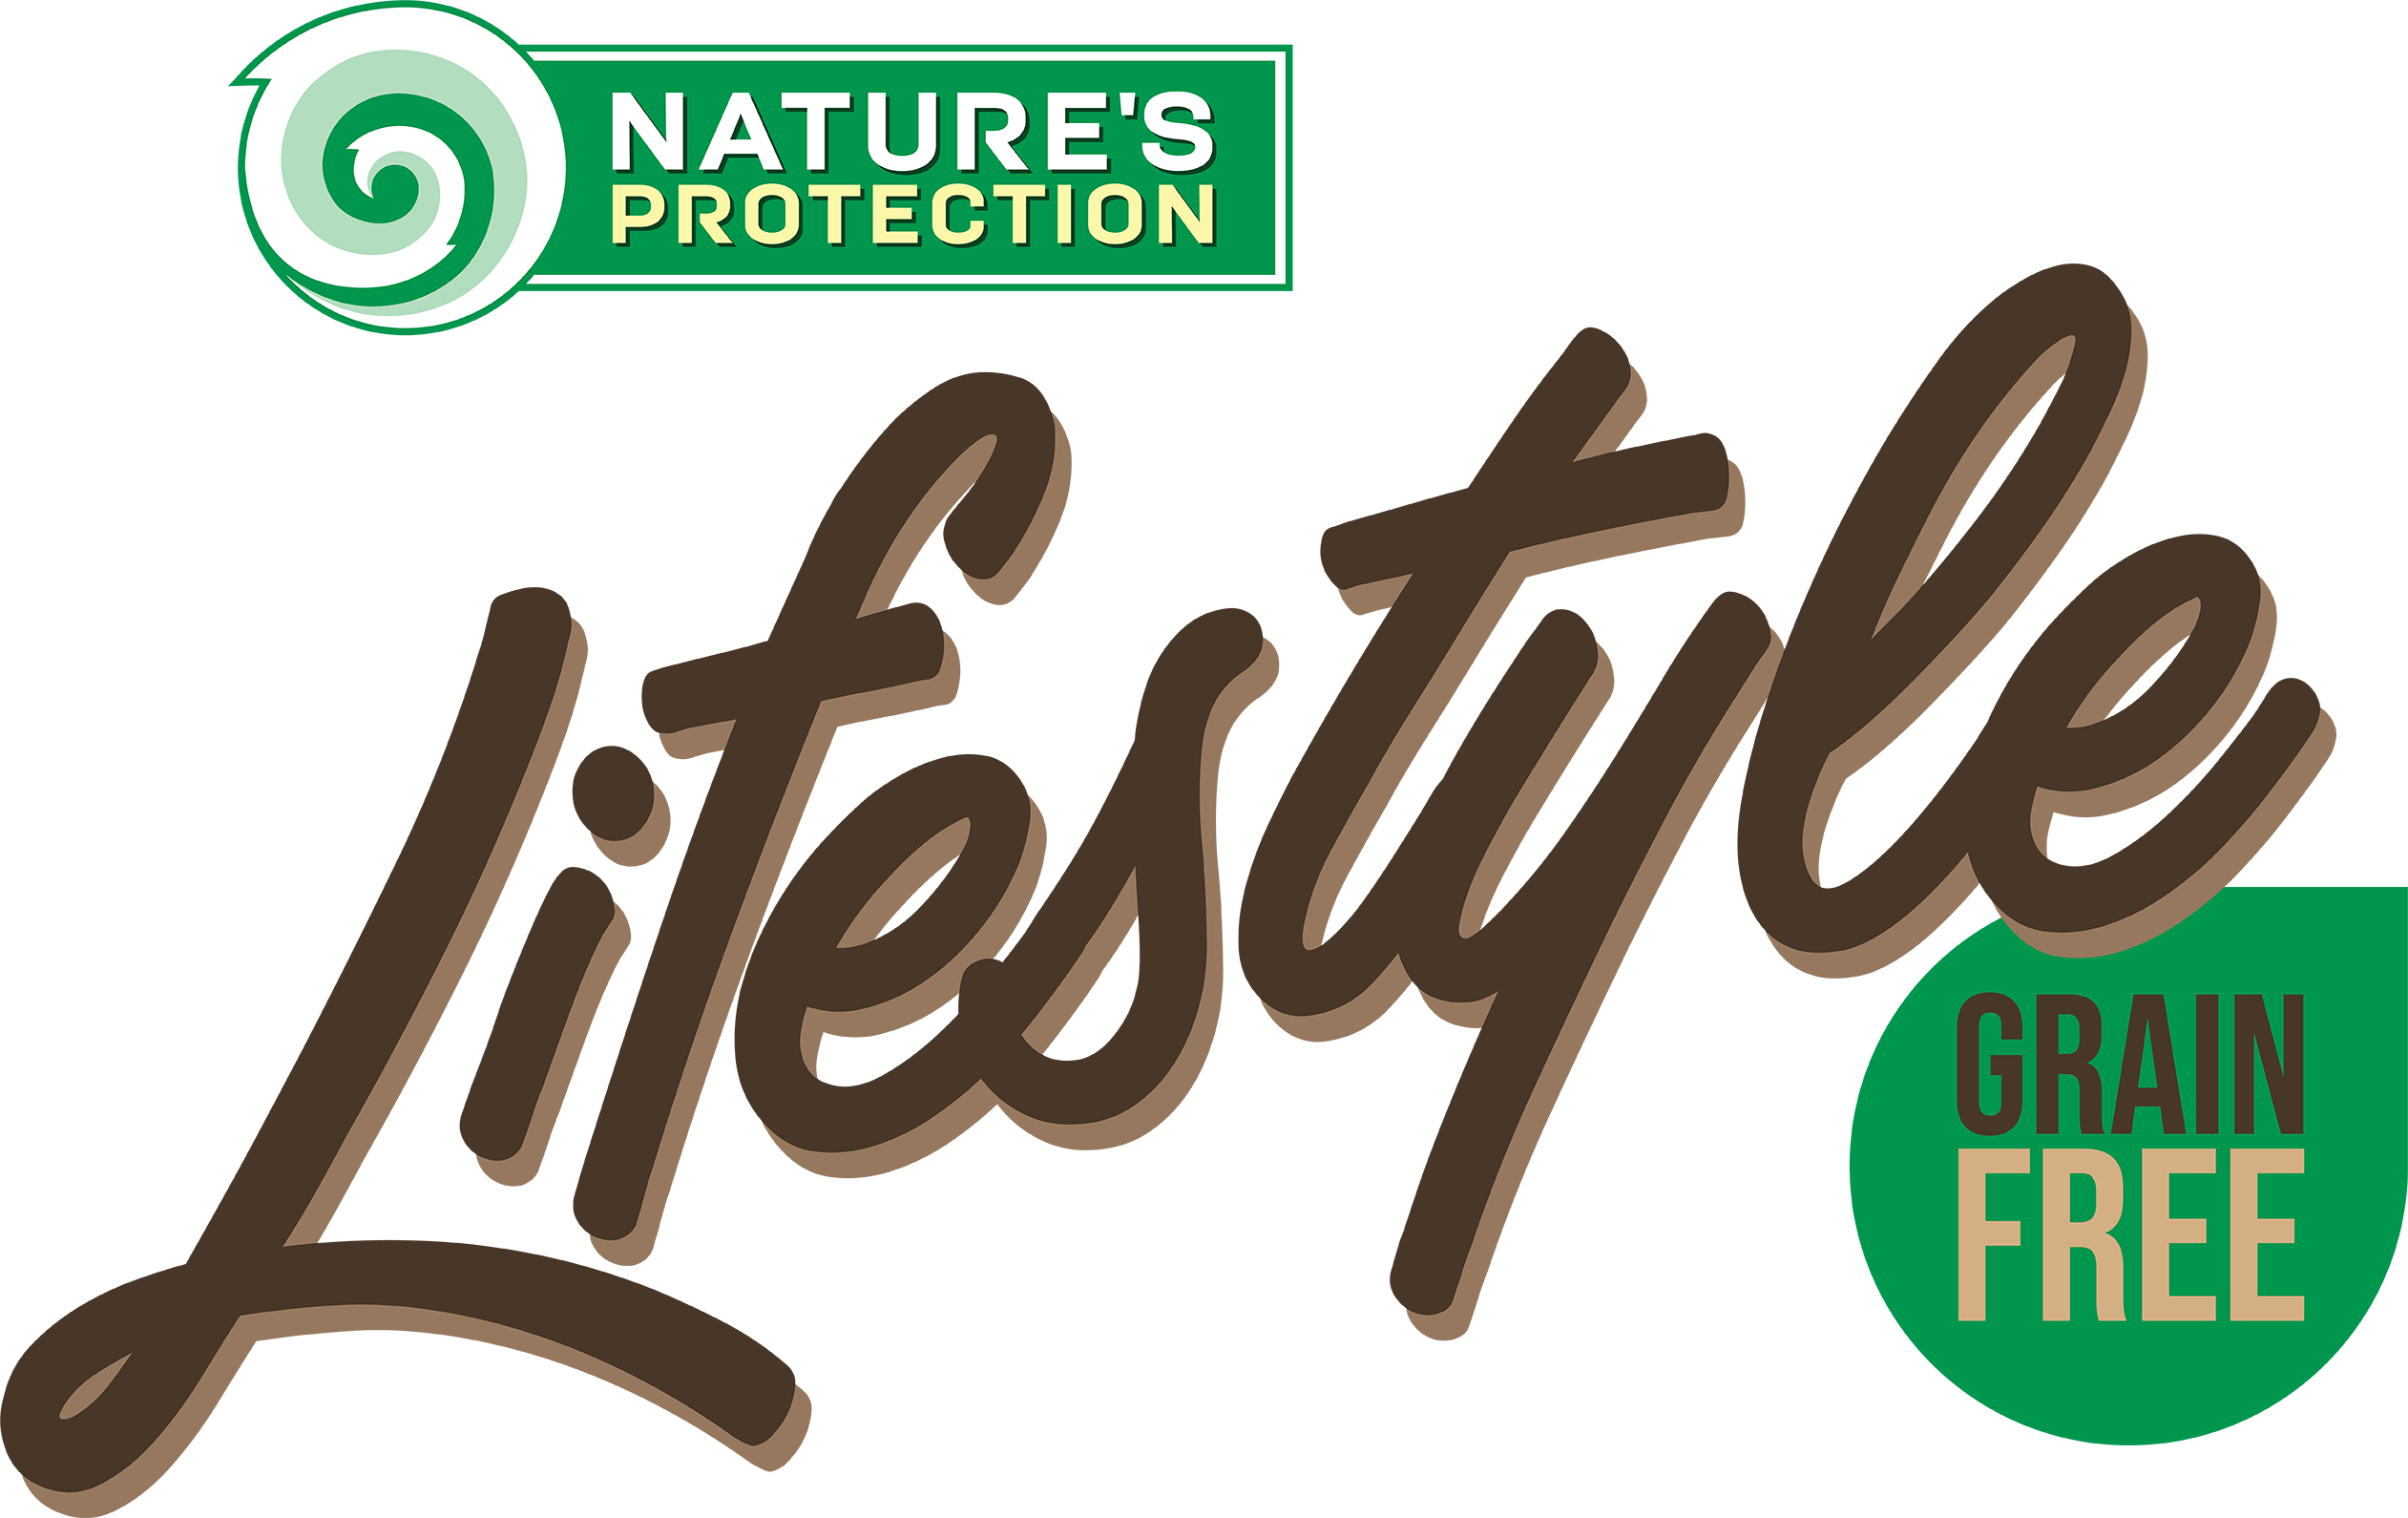 granule pro pry psy Nature´s Protection LIFESTYLE grain free